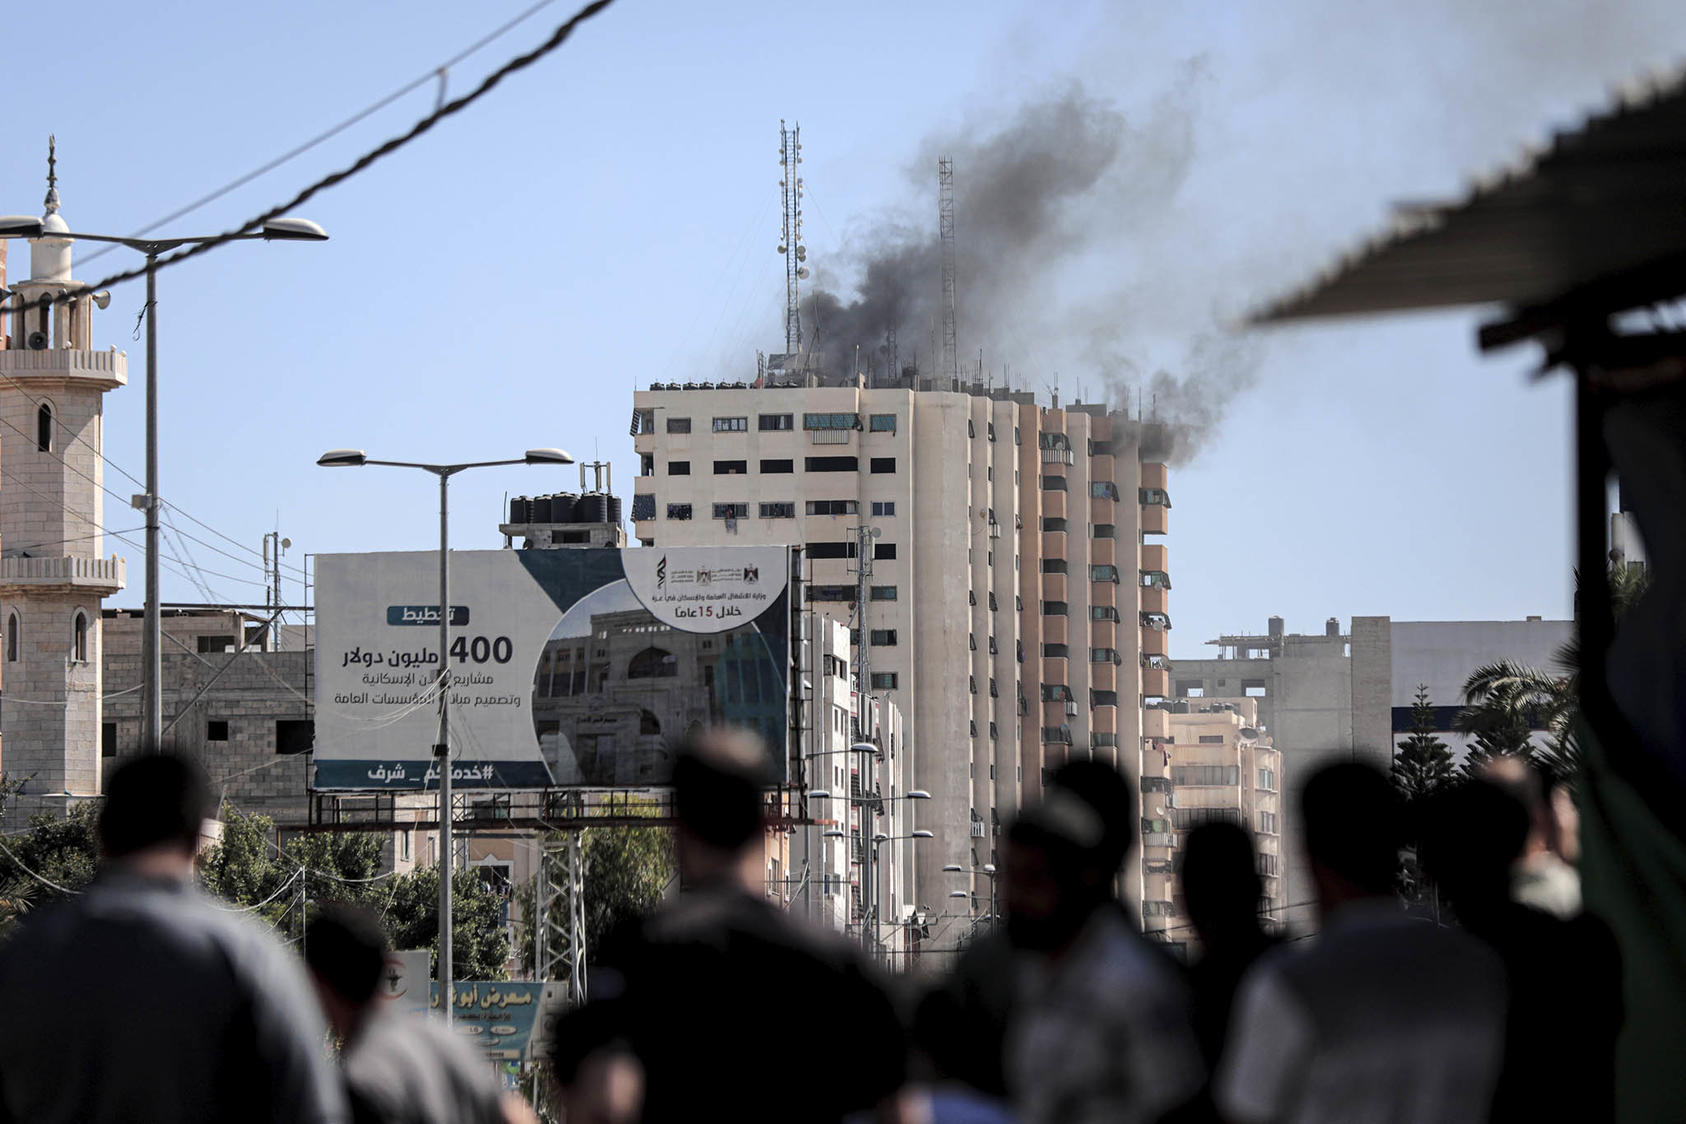 Smoke rises from a building hit by an Israeli fired rocket in Gaza City, Gaza Strip, Wednesday, May 19, 2021. (Hosam Salem/The New York Times)